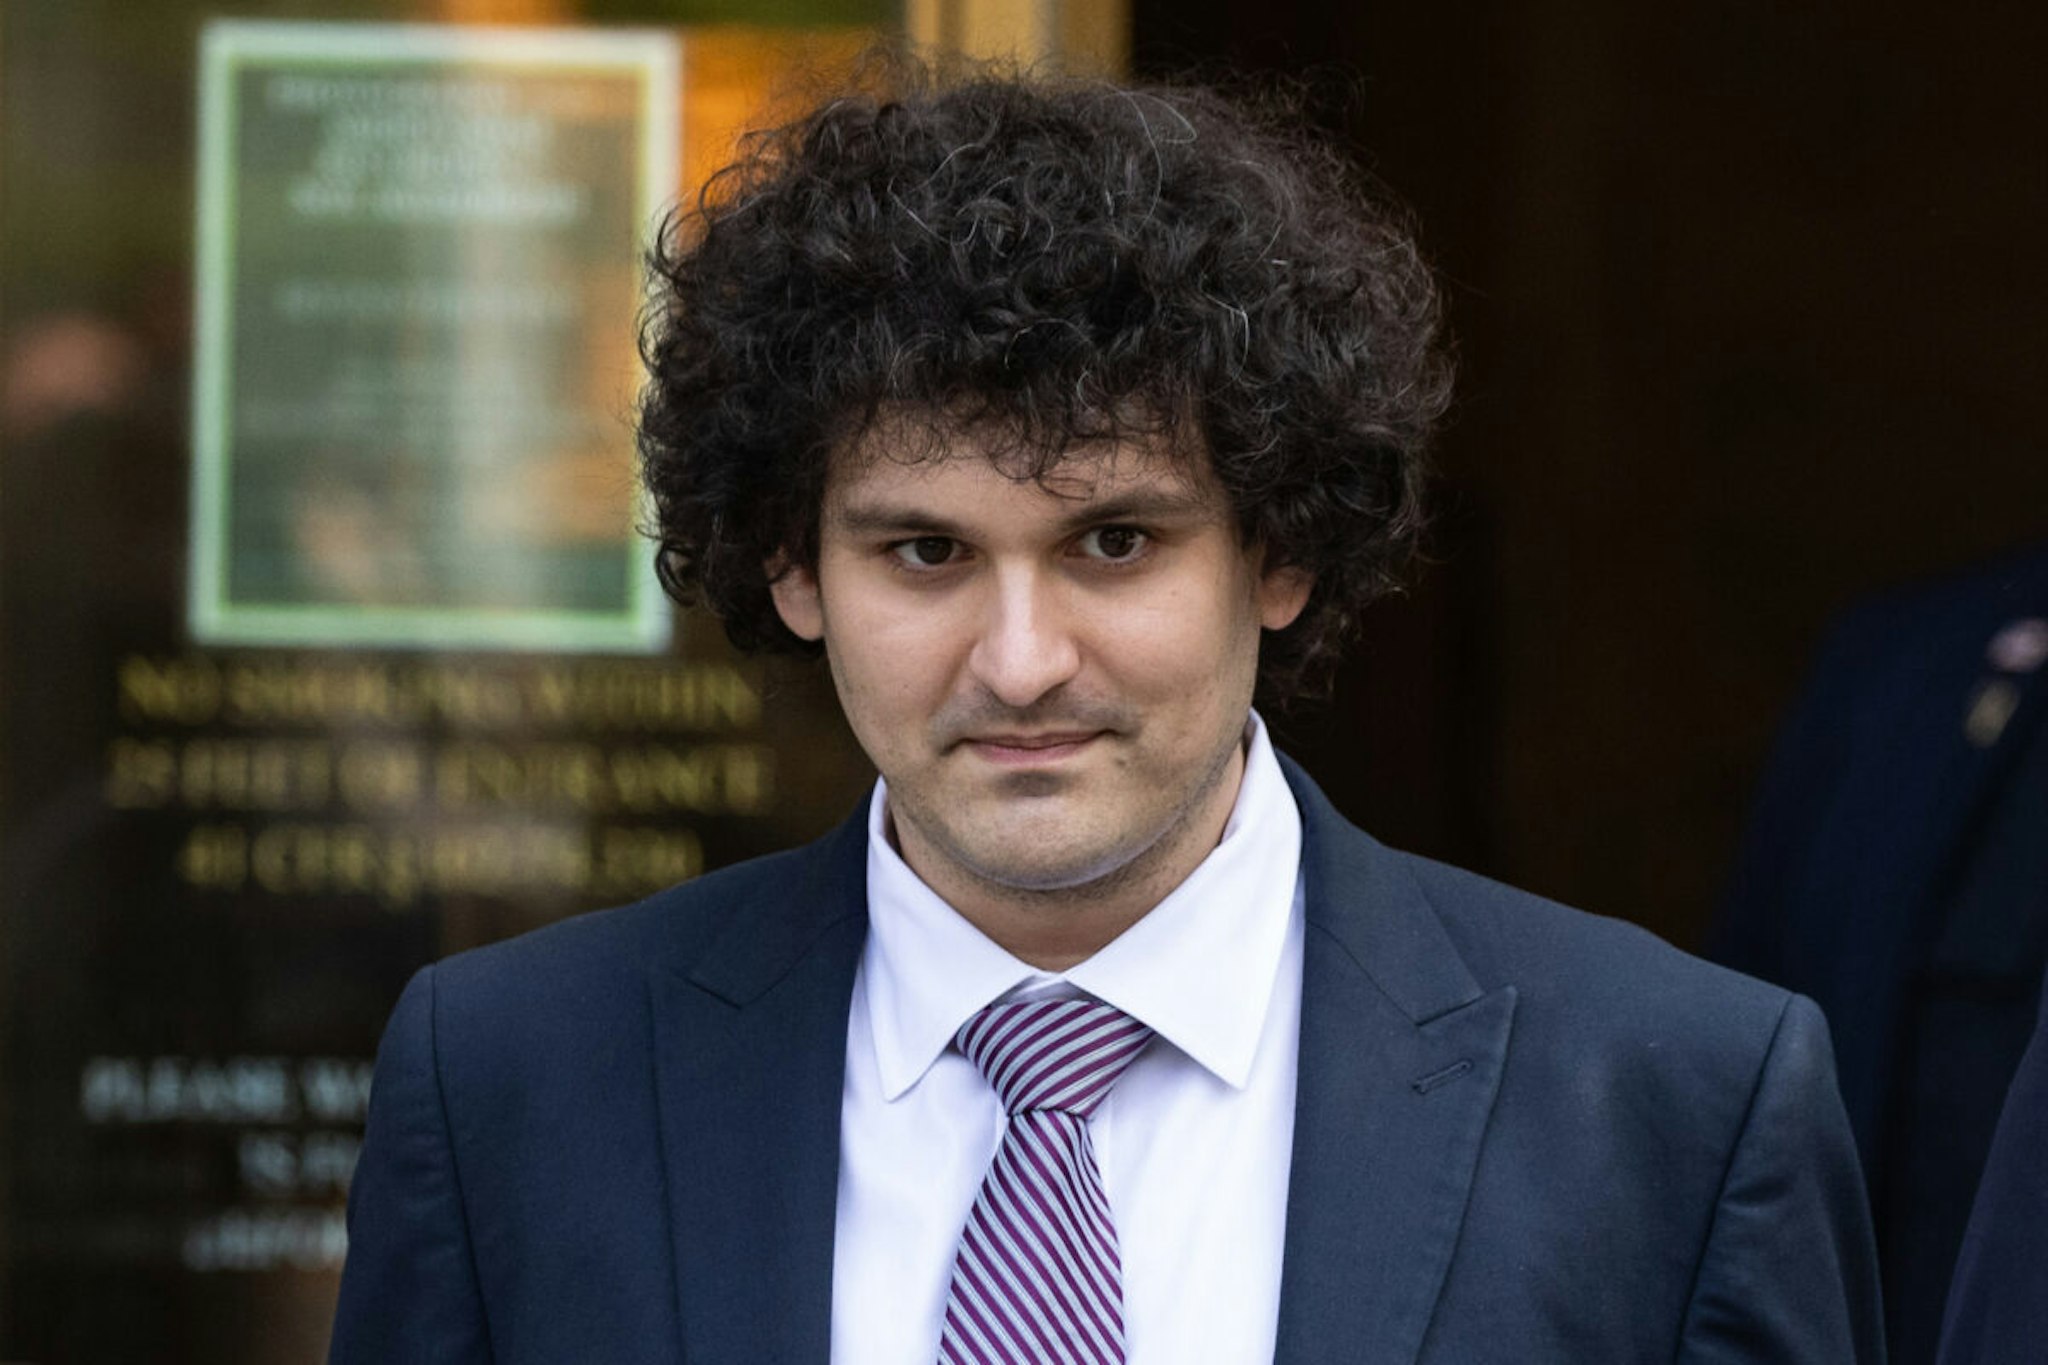 Sam Bankman-Fried, co-founder of FTX Cryptocurrency Derivatives Exchange, leaves court in New York, US, on Wednesday, July 26, 2023. Bankman-Fried faces a total of 13 counts ranging from conspiracy to commit wire fraud to conspiracy to violate the anti-bribery provisions of the Foreign Corrupt Practices Act, and faces more than 155 years in prison if convicted of all of them - although any sentence is likely to be much lower if he is found guilty.